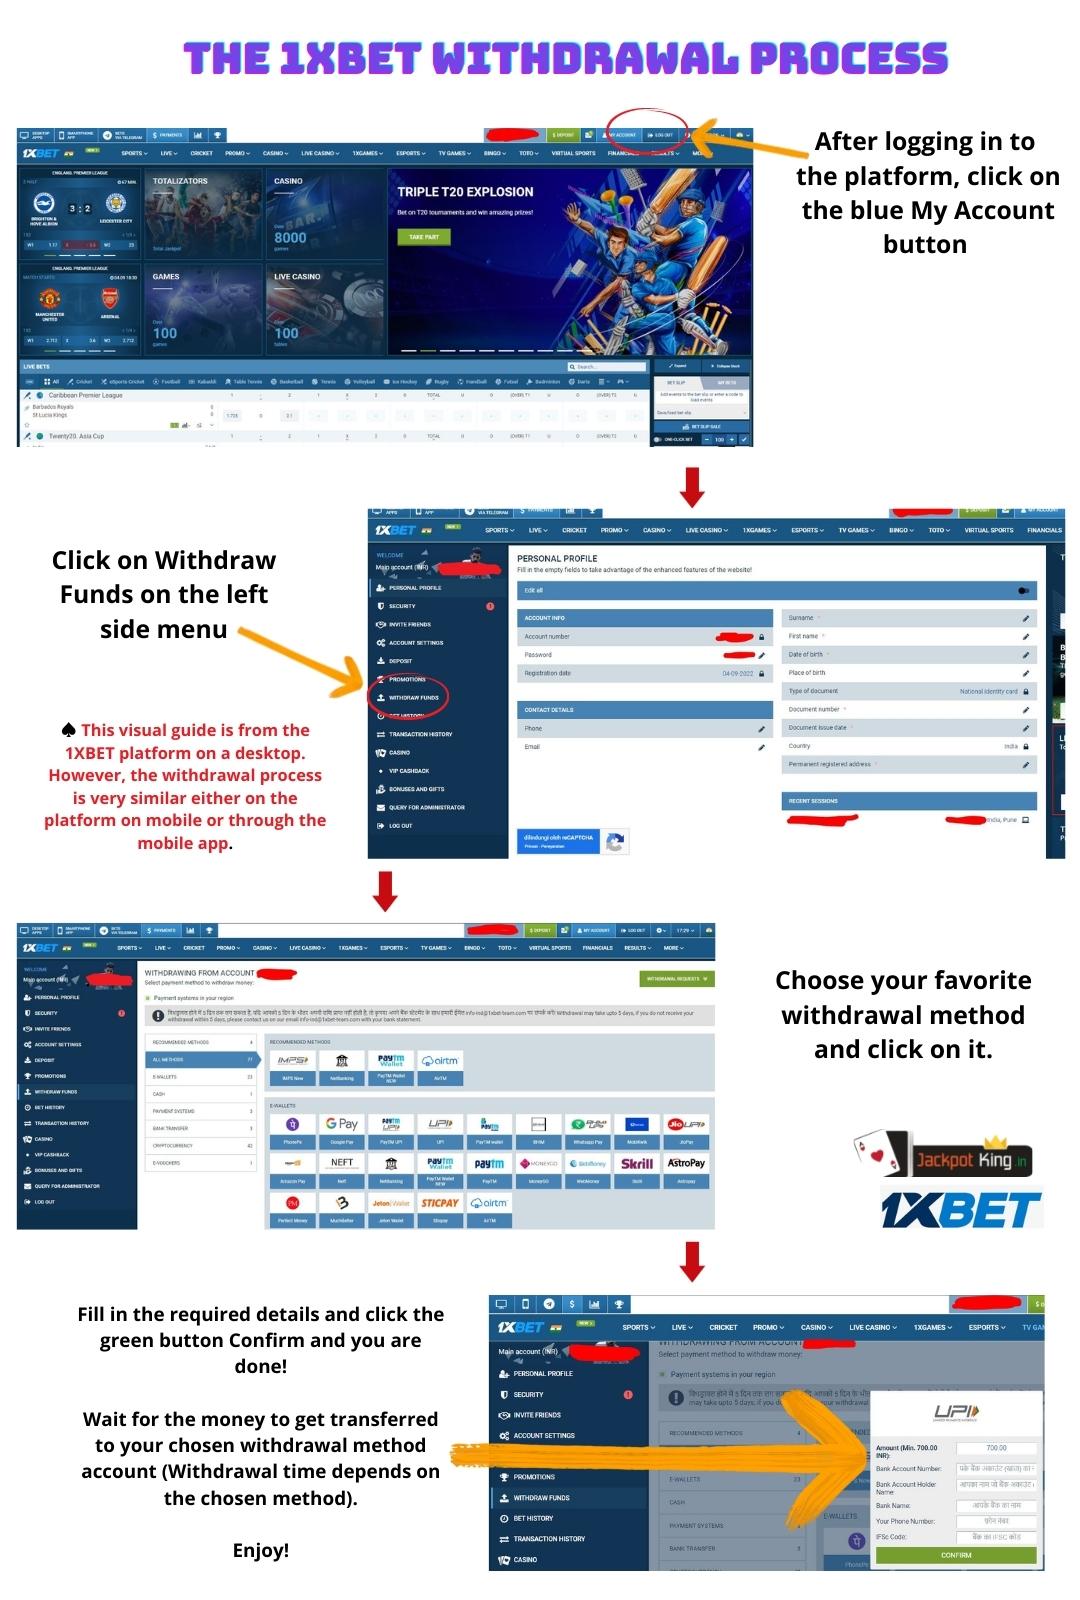 How to withdraw money from 1XBET - The full visual guide